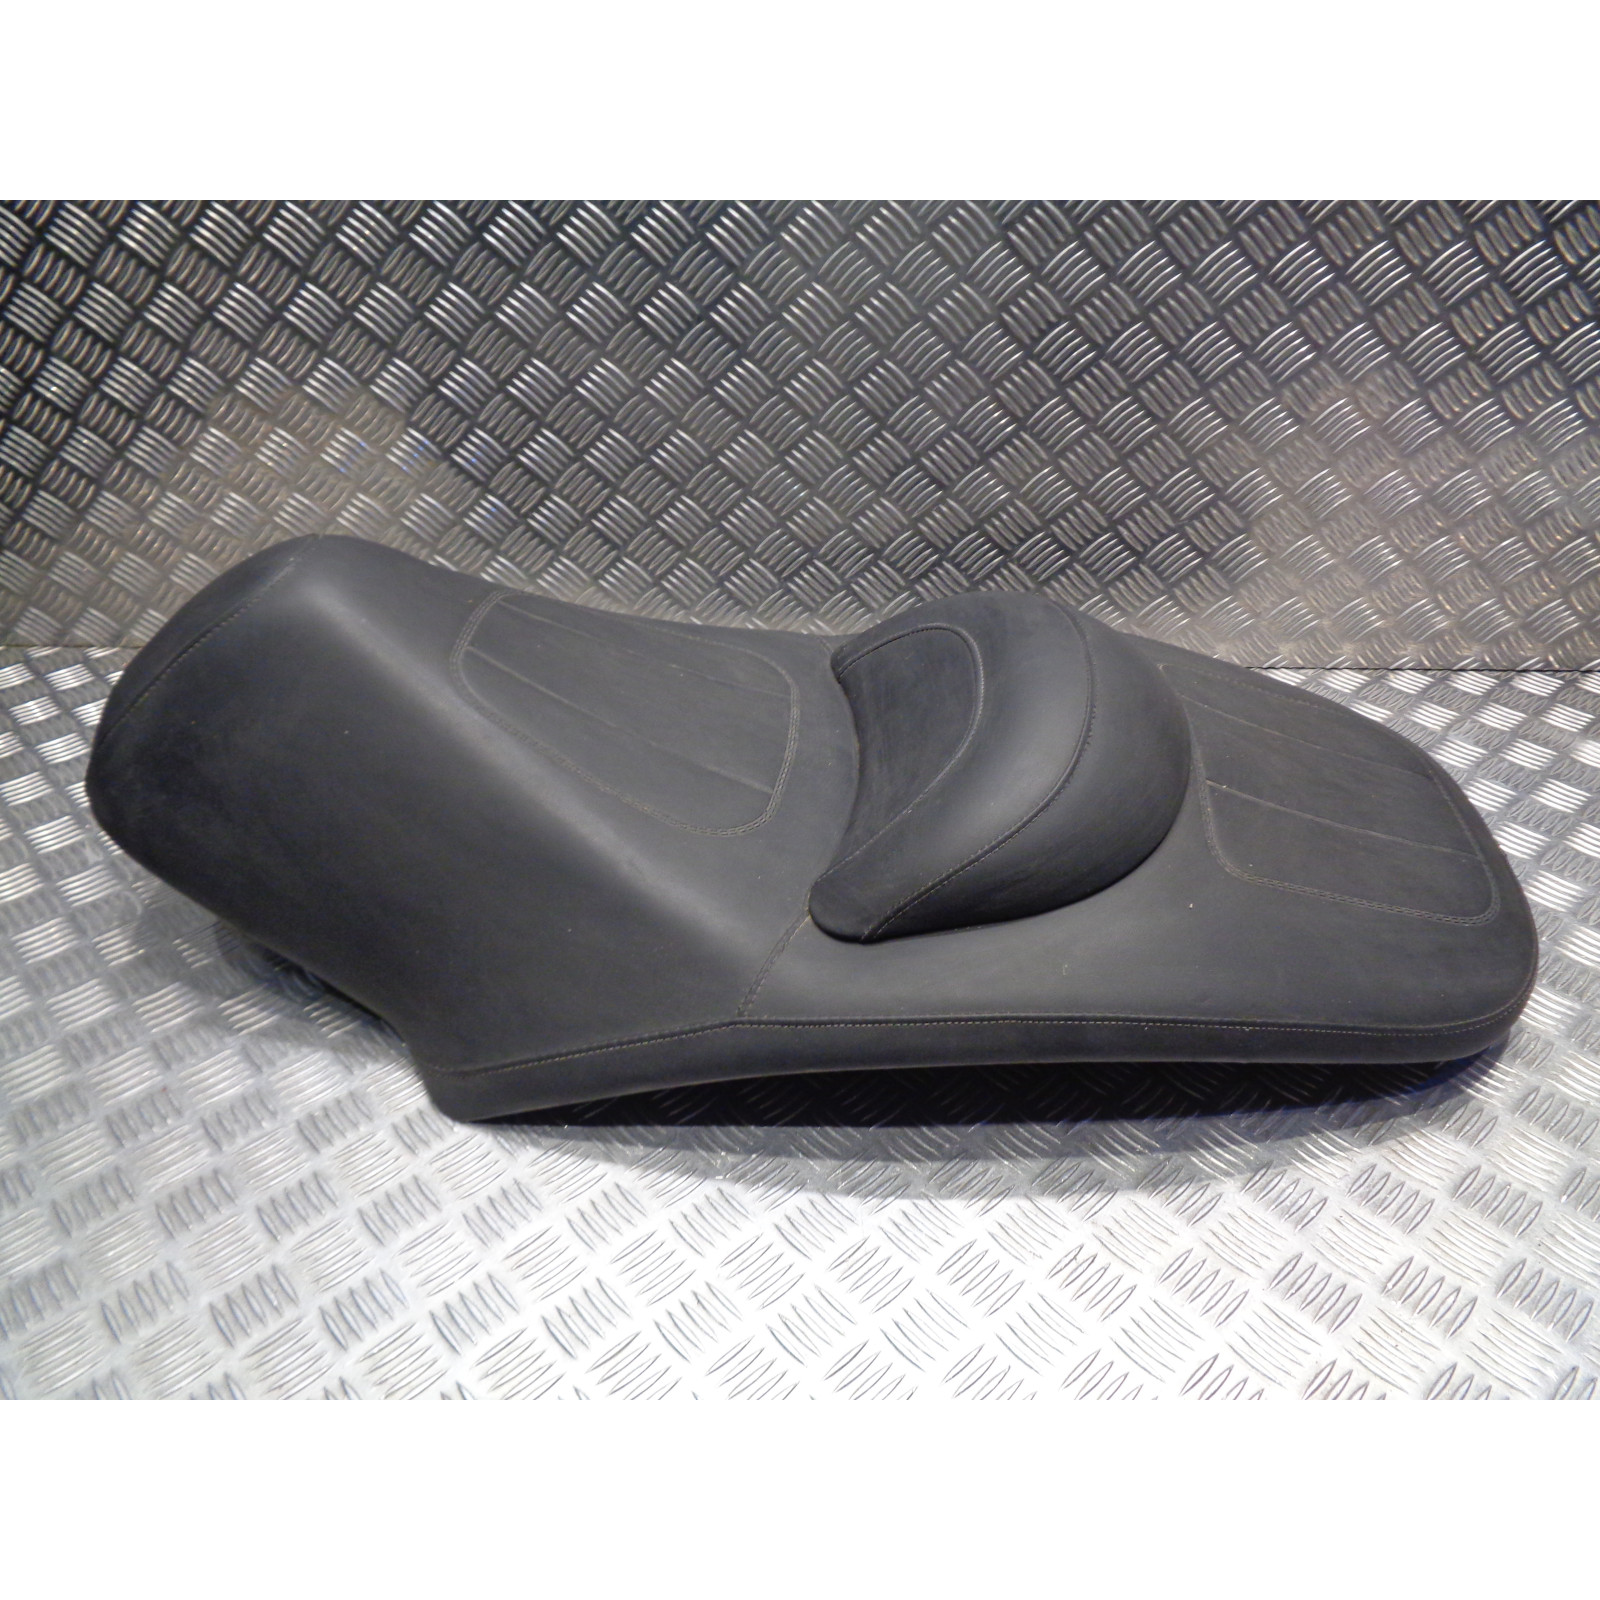 selle scooter kymco 125 grand dink 2001 - 2007